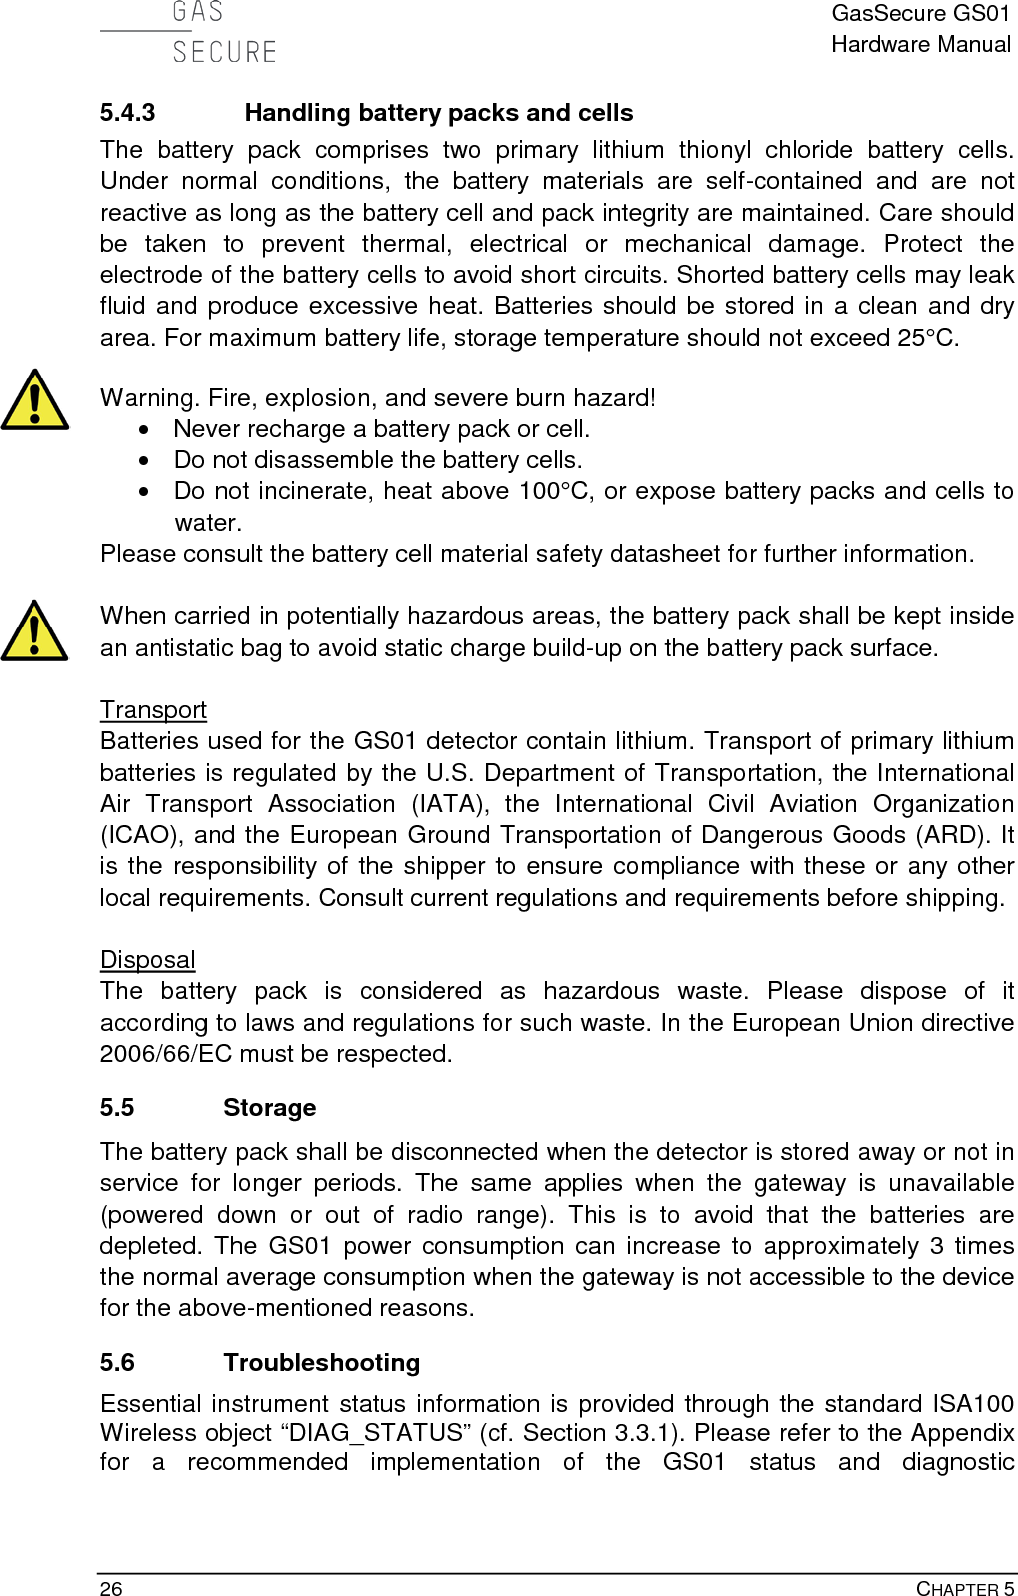  GasSecure GS01 Hardware Manual  26    CHAPTER 5 5.4.3 Handling battery packs and cells The battery pack comprises two primary lithium thionyl chloride battery cells. Under normal conditions, the battery materials are self-contained and are not reactive as long as the battery cell and pack integrity are maintained. Care should be taken to prevent thermal, electrical or mechanical damage. Protect the electrode of the battery cells to avoid short circuits. Shorted battery cells may leak fluid and produce excessive heat. Batteries should be stored in a clean and dry area. For maximum battery life, storage temperature should not exceed 25°C.  Warning. Fire, explosion, and severe burn hazard! • Never recharge a battery pack or cell. • Do not disassemble the battery cells. • Do not incinerate, heat above 100°C, or expose battery packs and cells to water. Please consult the battery cell material safety datasheet for further information.  When carried in potentially hazardous areas, the battery pack shall be kept inside an antistatic bag to avoid static charge build-up on the battery pack surface.  Transport Batteries used for the GS01 detector contain lithium. Transport of primary lithium batteries is regulated by the U.S. Department of Transportation, the International Air Transport Association (IATA), the International Civil Aviation Organization (ICAO), and the European Ground Transportation of Dangerous Goods (ARD). It is the responsibility of the shipper to ensure compliance with these or any other local requirements. Consult current regulations and requirements before shipping.  Disposal The battery pack is considered as hazardous waste. Please dispose of it according to laws and regulations for such waste. In the European Union directive 2006/66/EC must be respected. 5.5 Storage The battery pack shall be disconnected when the detector is stored away or not in service for longer periods. The same applies when the gateway is unavailable (powered down or out of radio range).  This is to avoid that the batteries are depleted. The GS01 power consumption can increase to approximately 3 times the normal average consumption when the gateway is not accessible to the device for the above-mentioned reasons. 5.6 Troubleshooting Essential instrument status information is provided through the standard ISA100 Wireless object “DIAG_STATUS” (cf. Section 3.3.1). Please refer to the Appendix for  a  recommended implementation of the  GS01 status and diagnostic 